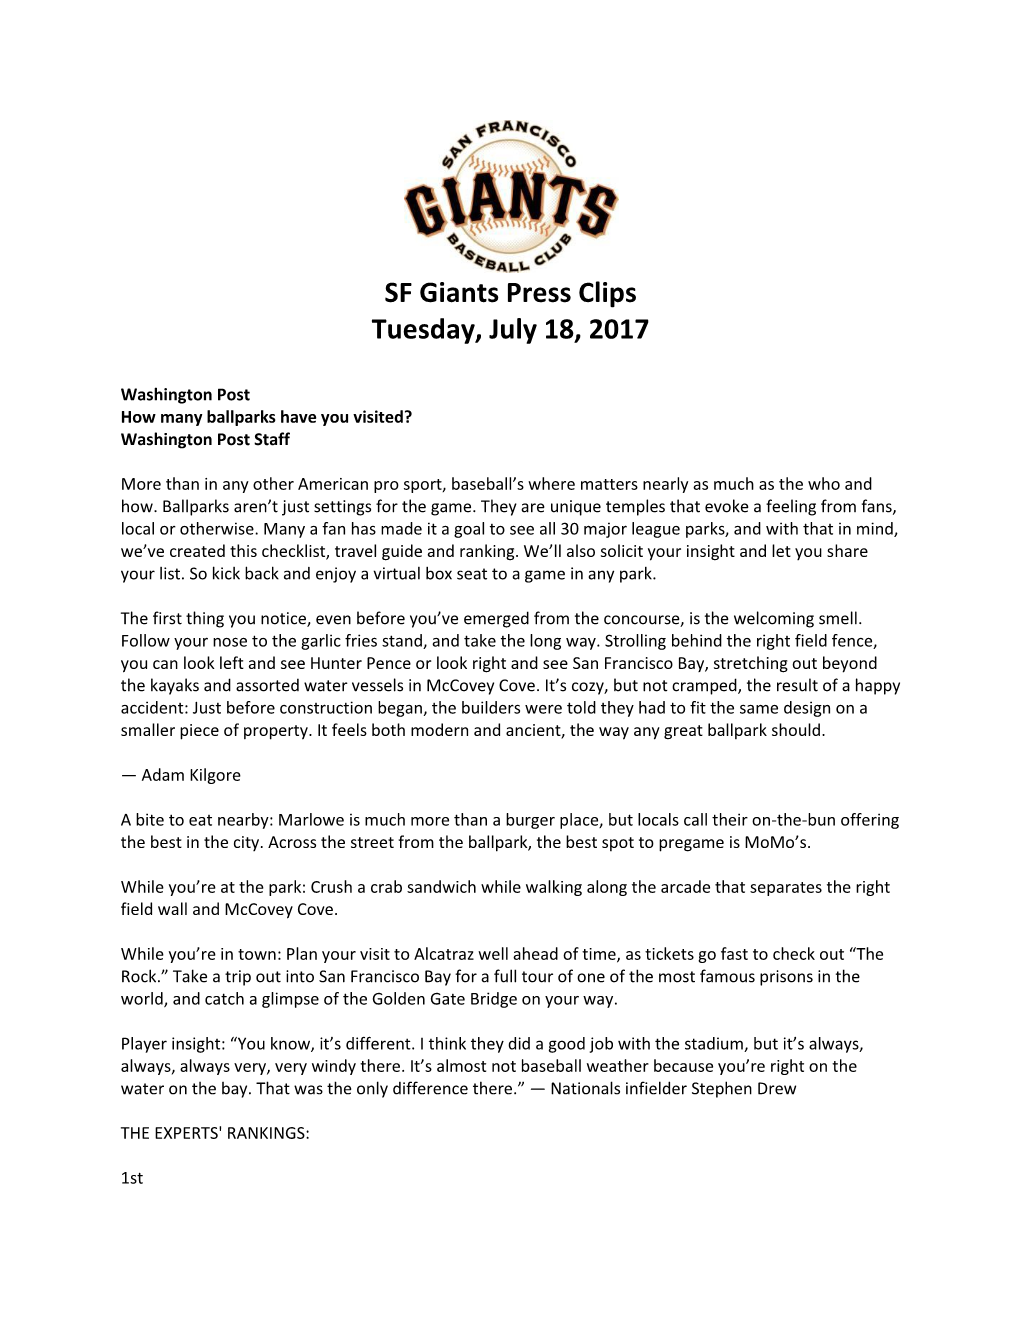 SF Giants Press Clips Tuesday, July 18, 2017